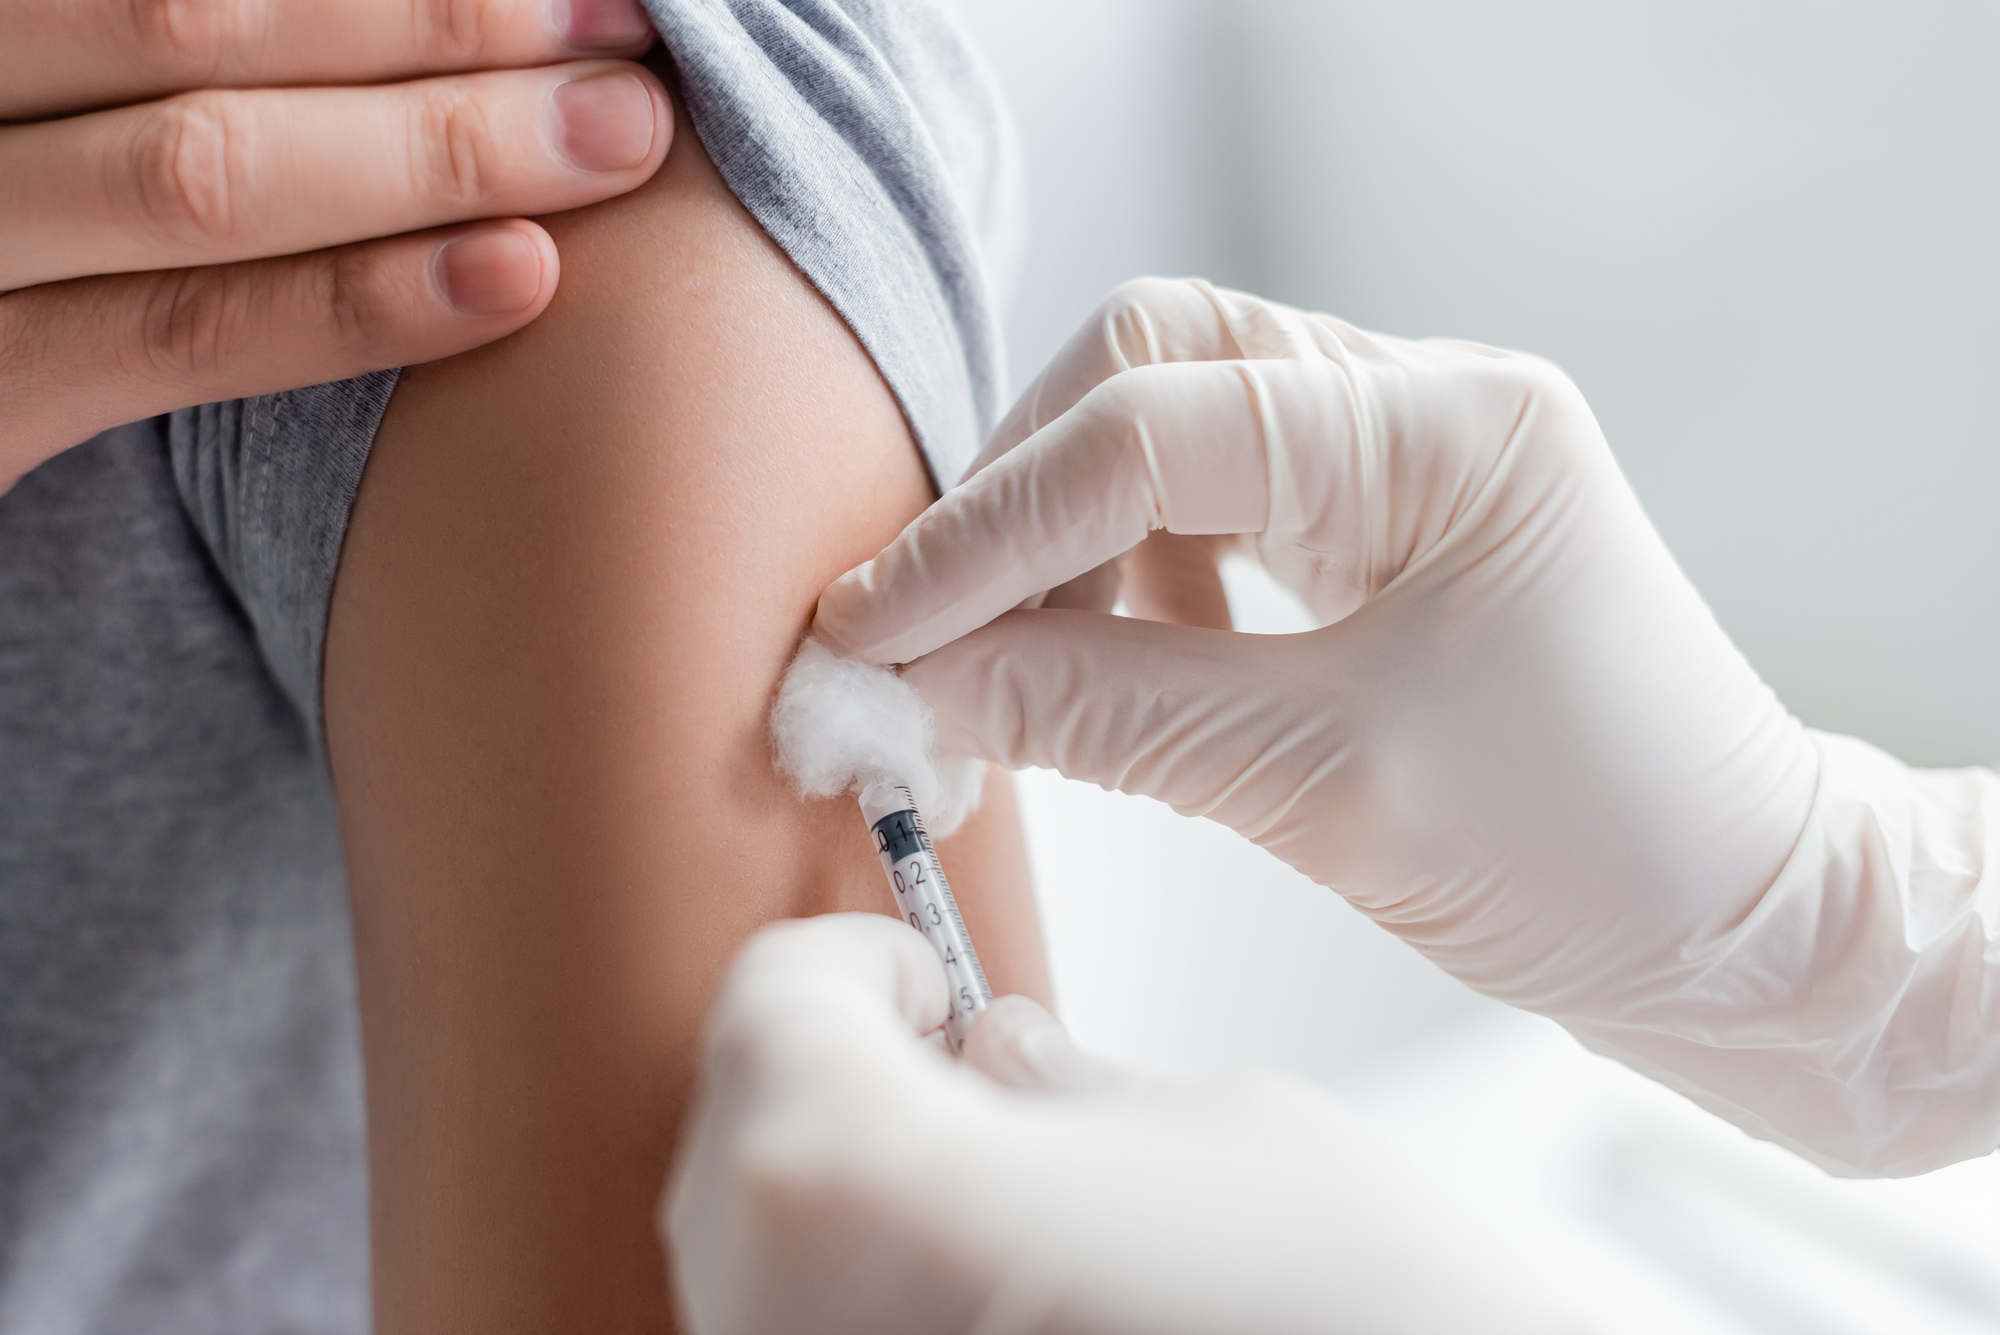 Offer your employees vaccination policy guidance.